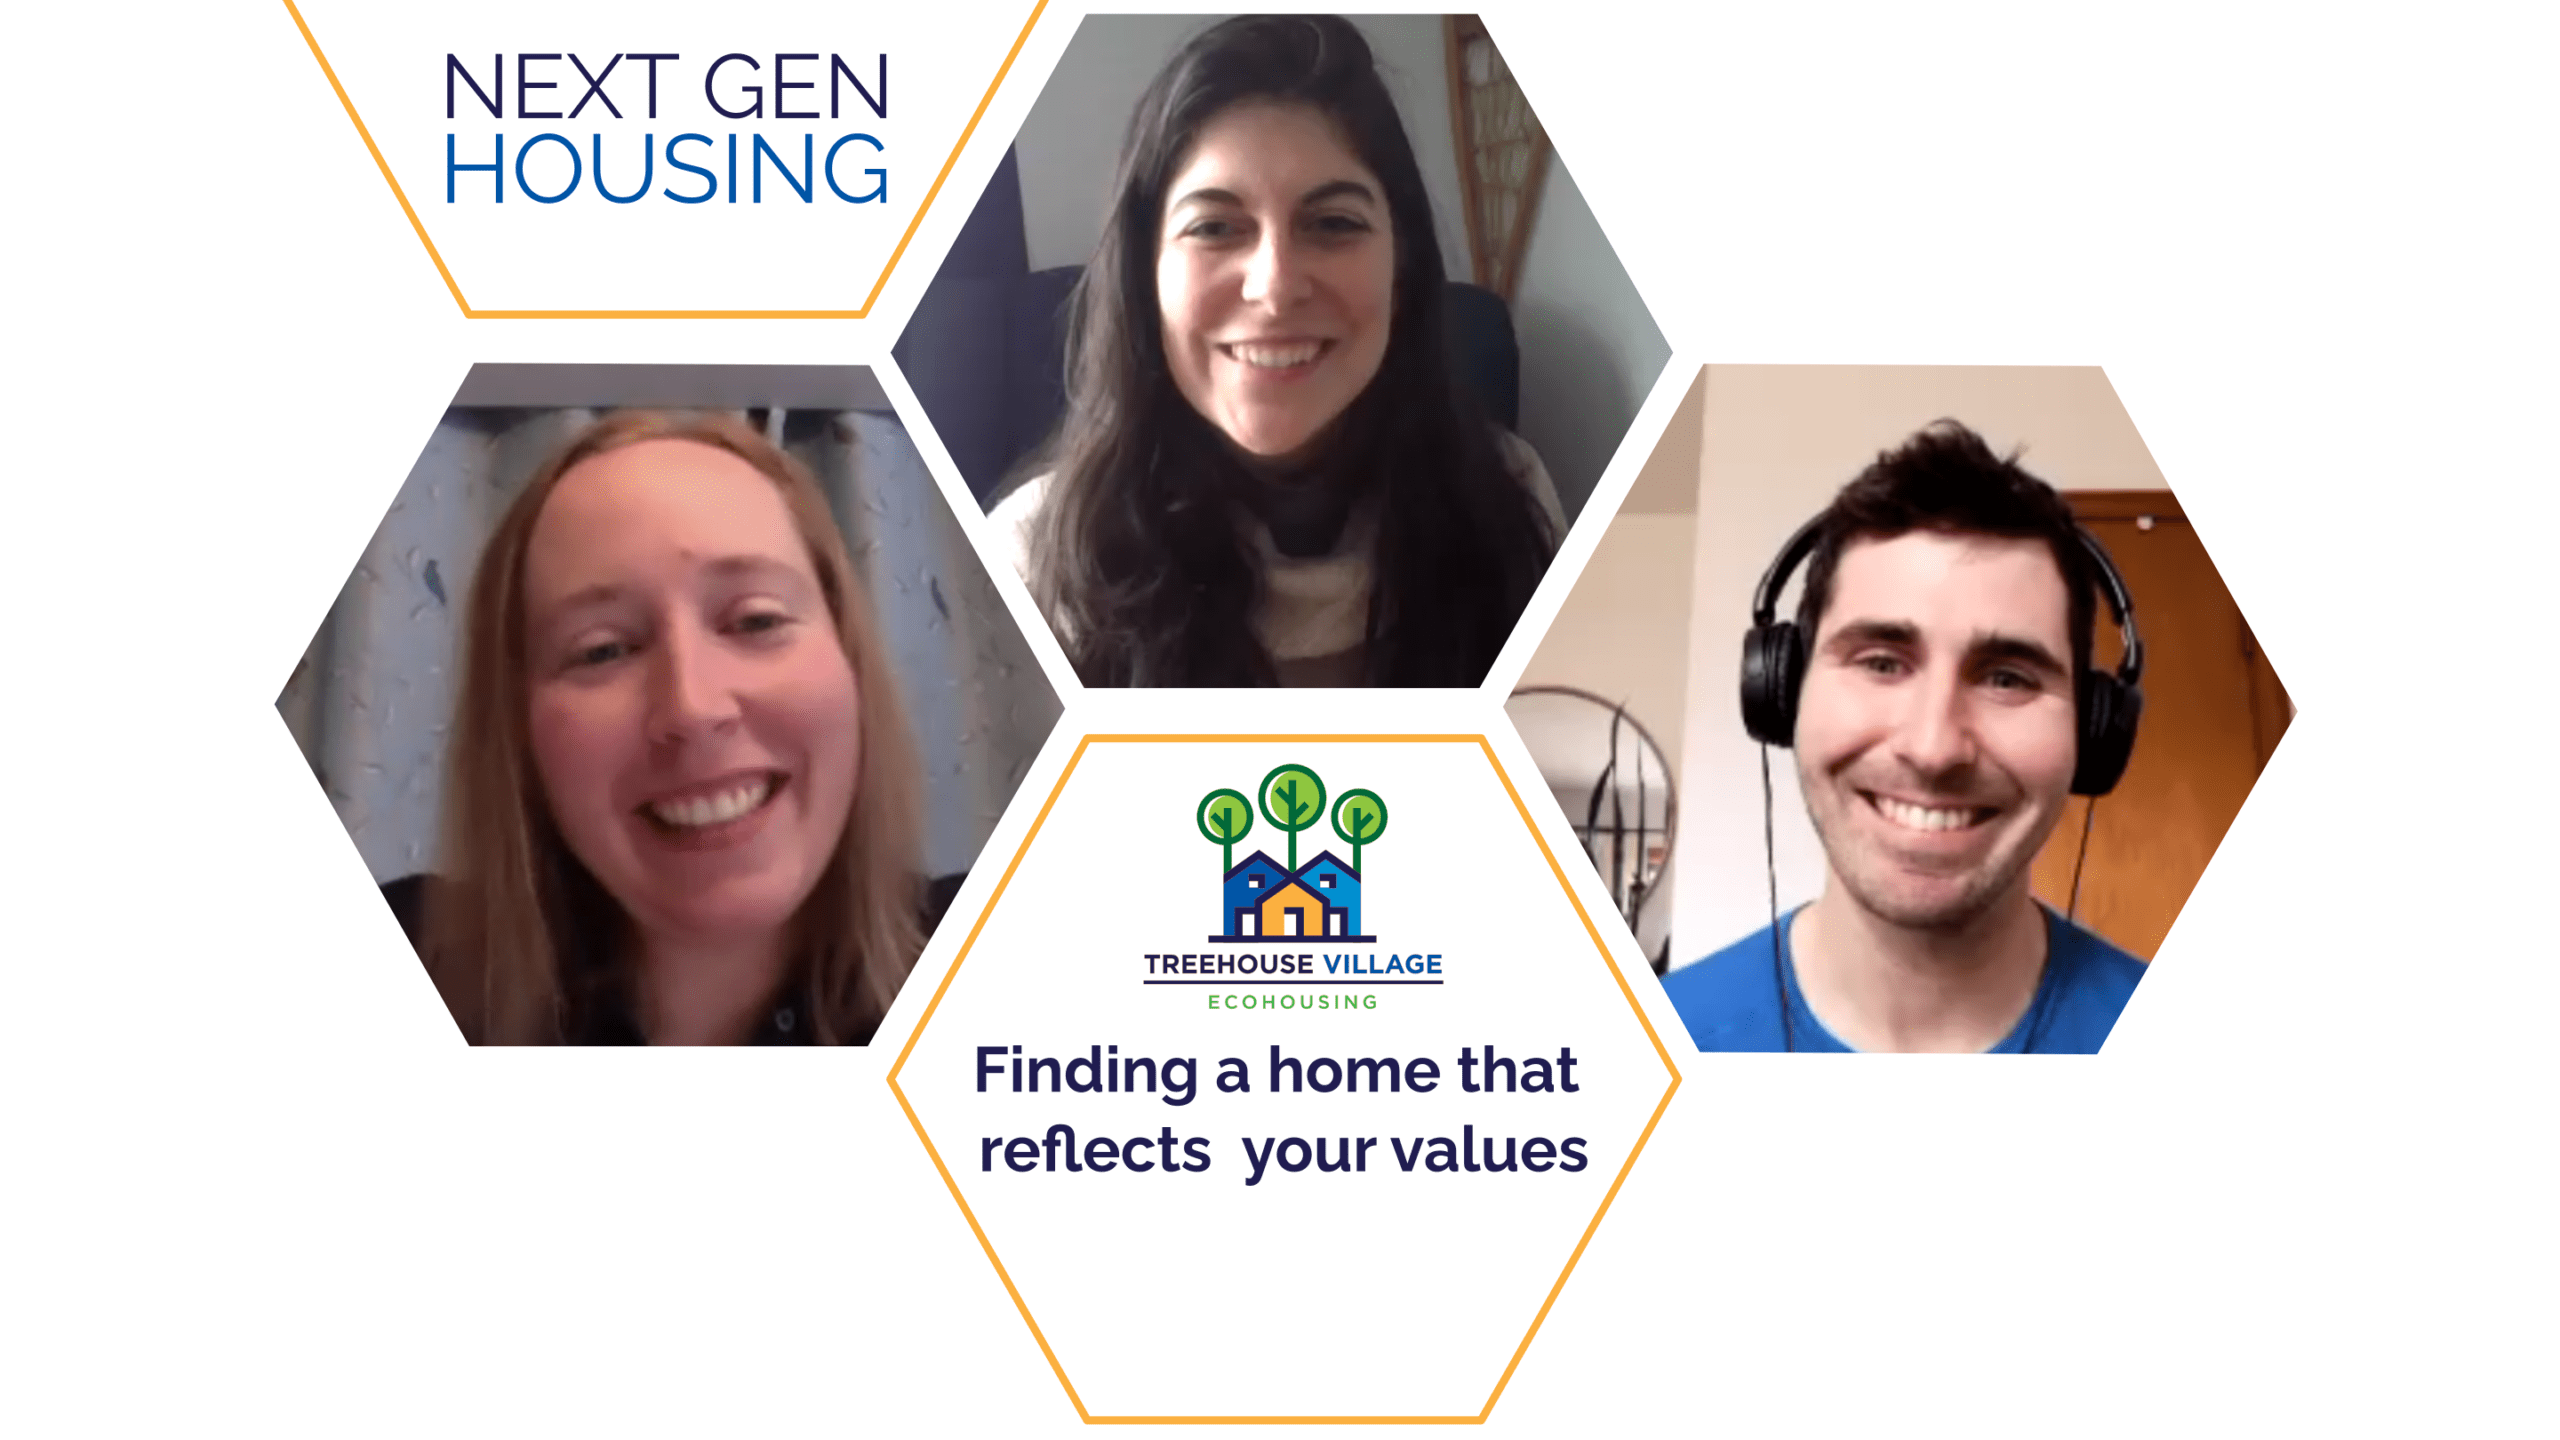 Treehouse Village’s First “Next Gen Housing” Webinar: A Home That Reflects Your Values